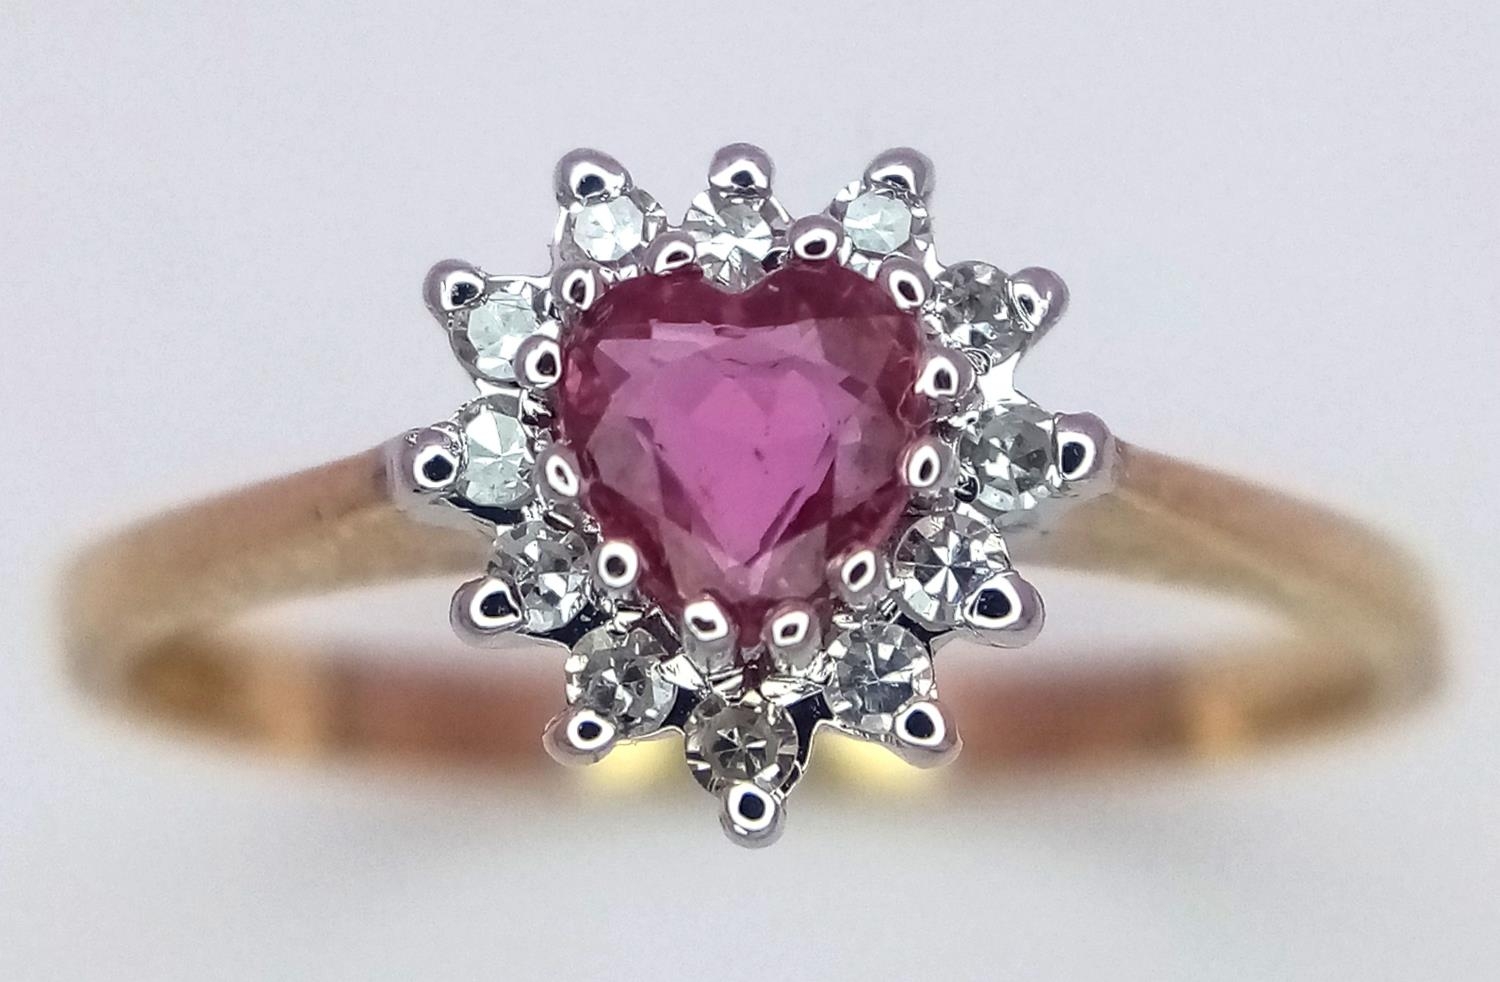 A 9K YELLOW GOLD DIAMOND & PINK SAPPHIRE HEART RING 1.6G SIZE N. ref: SPAS 9010 - Image 2 of 5